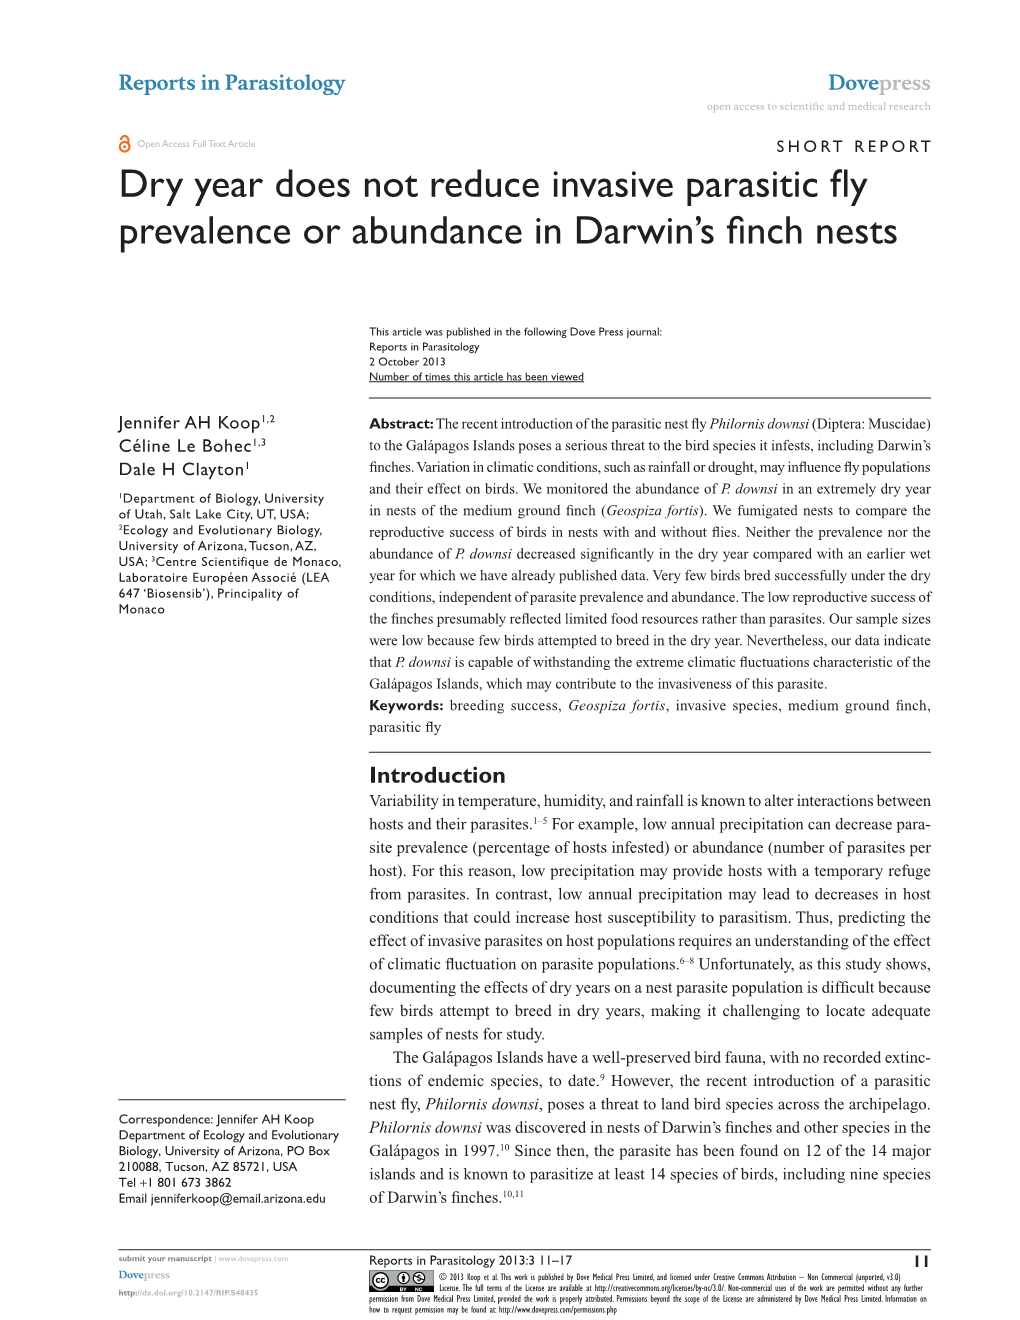 Dry Year Does Not Reduce Invasive Parasitic Fly Prevalence Or Abundance in Darwin’S Finch Nests